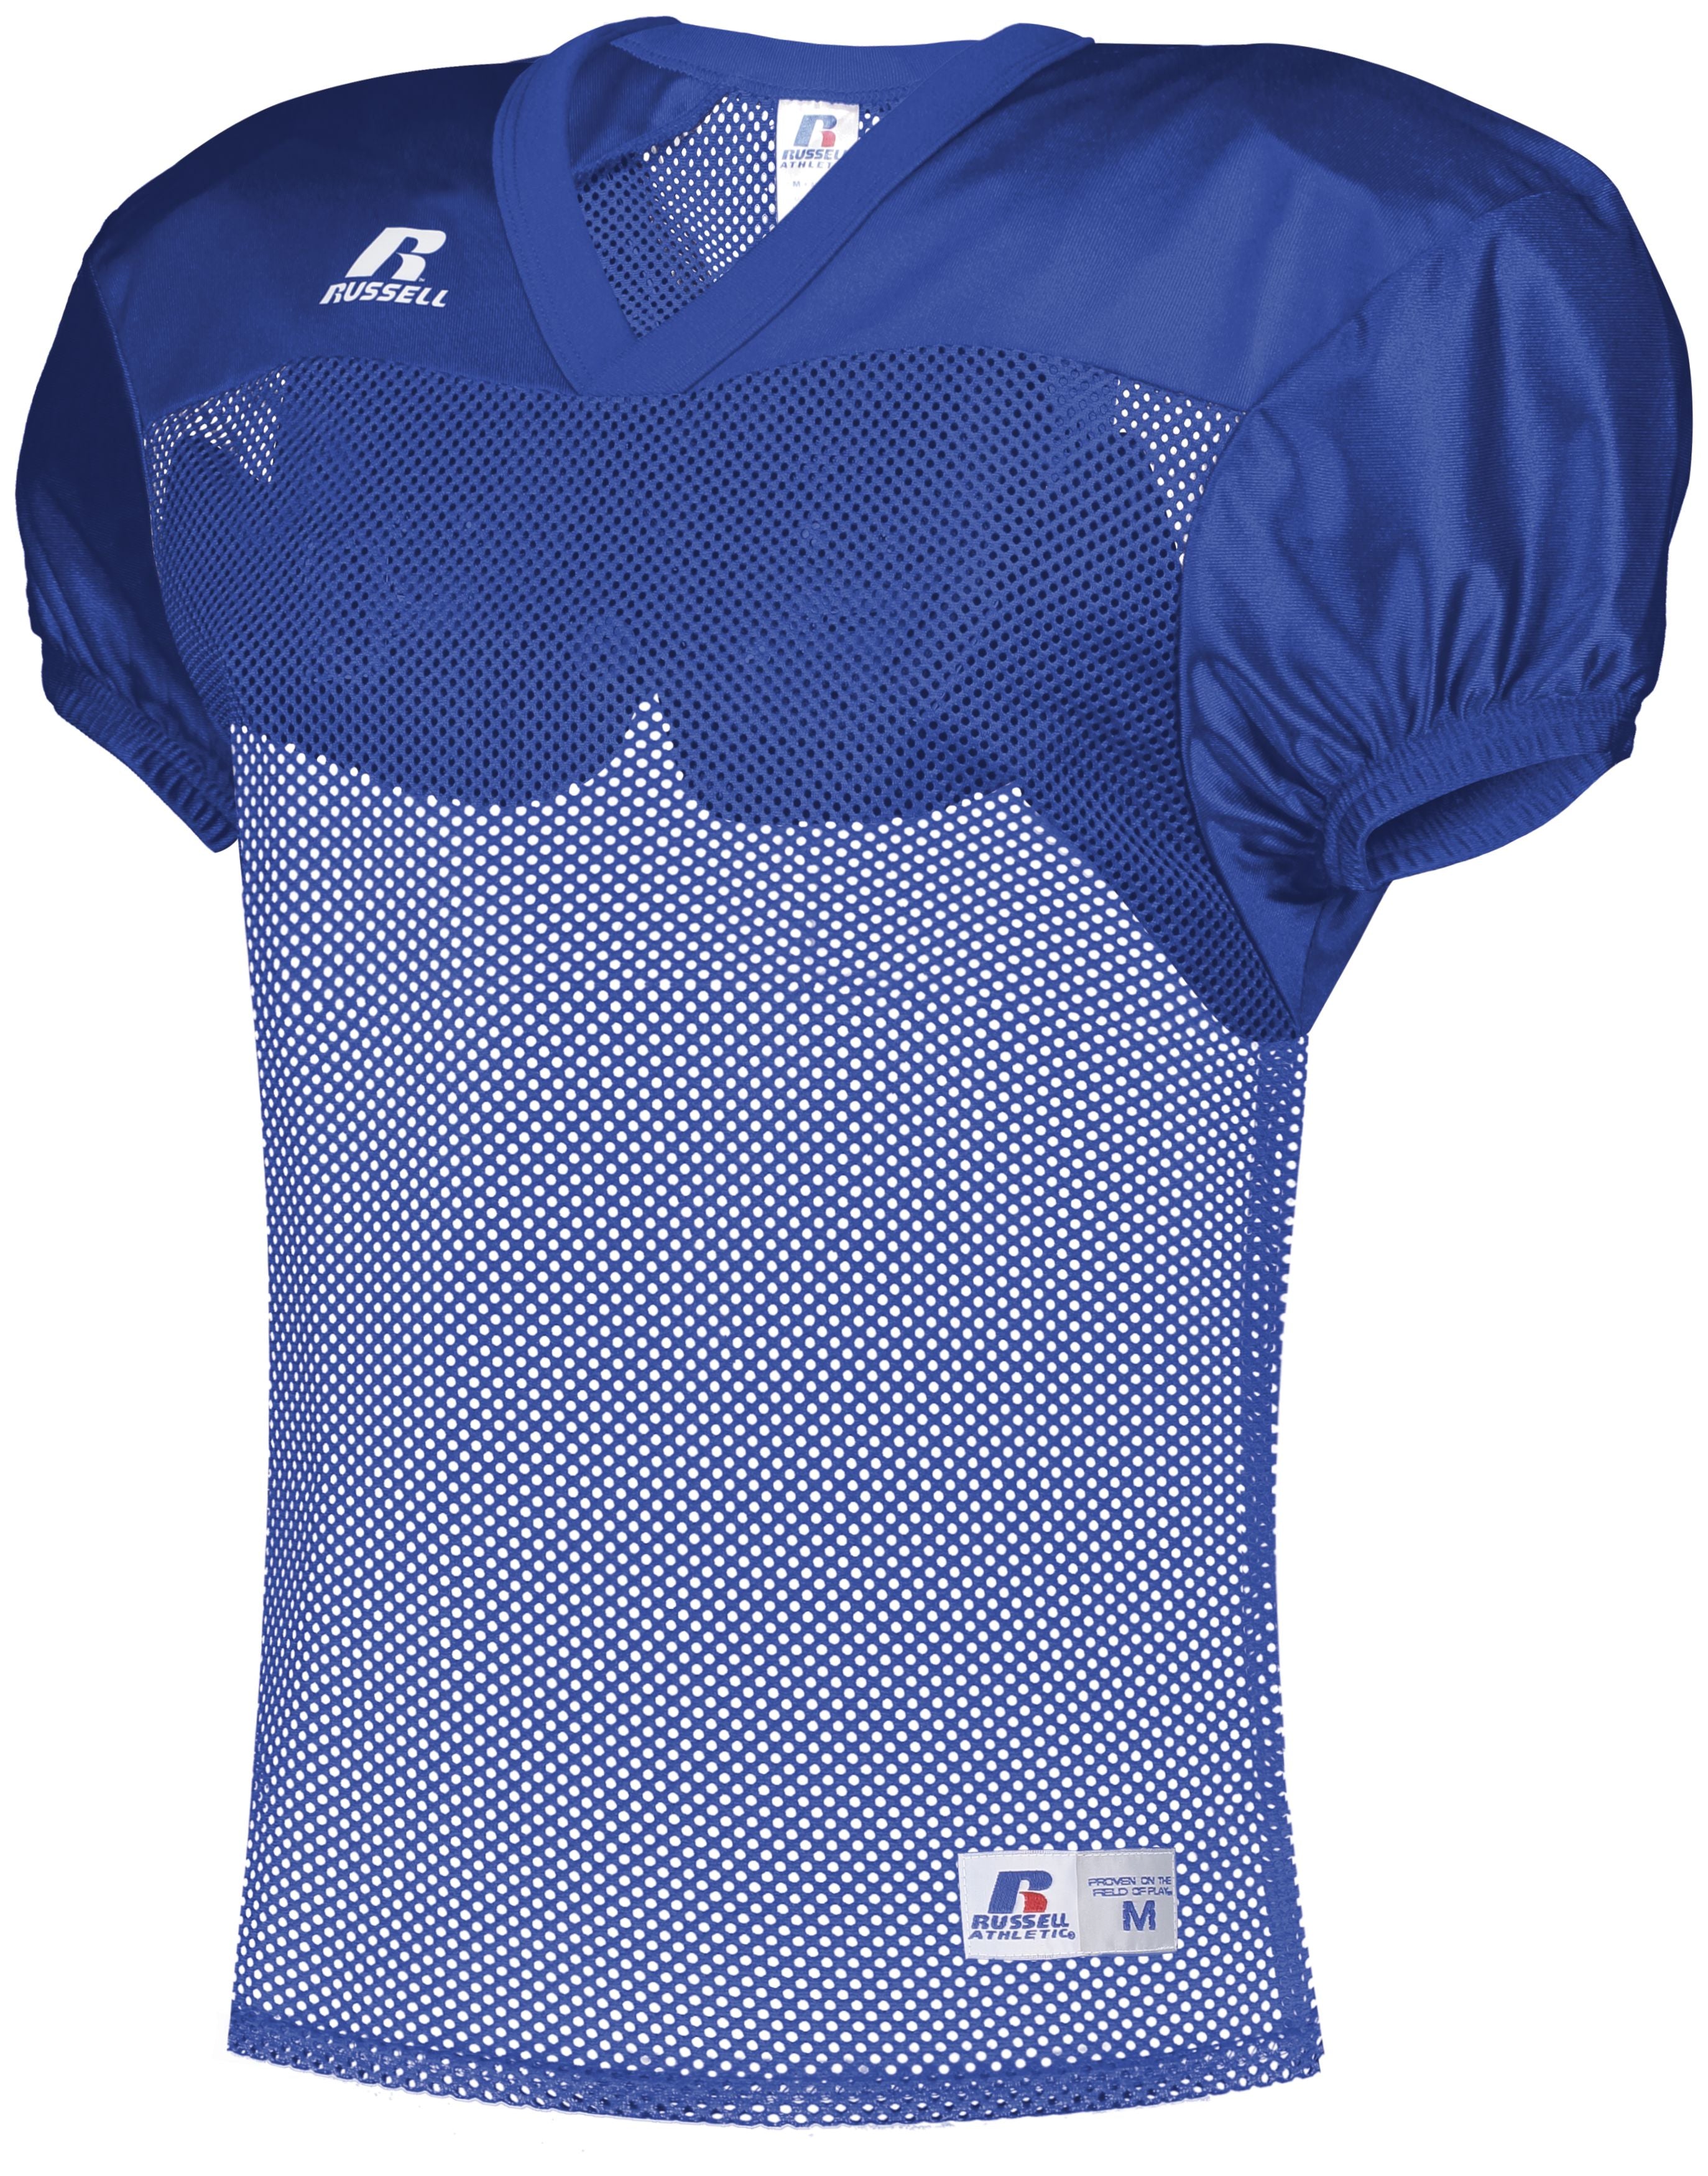 Russell Athletic Youth Stock Practice Jersey in Royal  -Part of the Youth, Youth-Jersey, Football, Russell-Athletic-Products, Shirts, All-Sports, All-Sports-1 product lines at KanaleyCreations.com